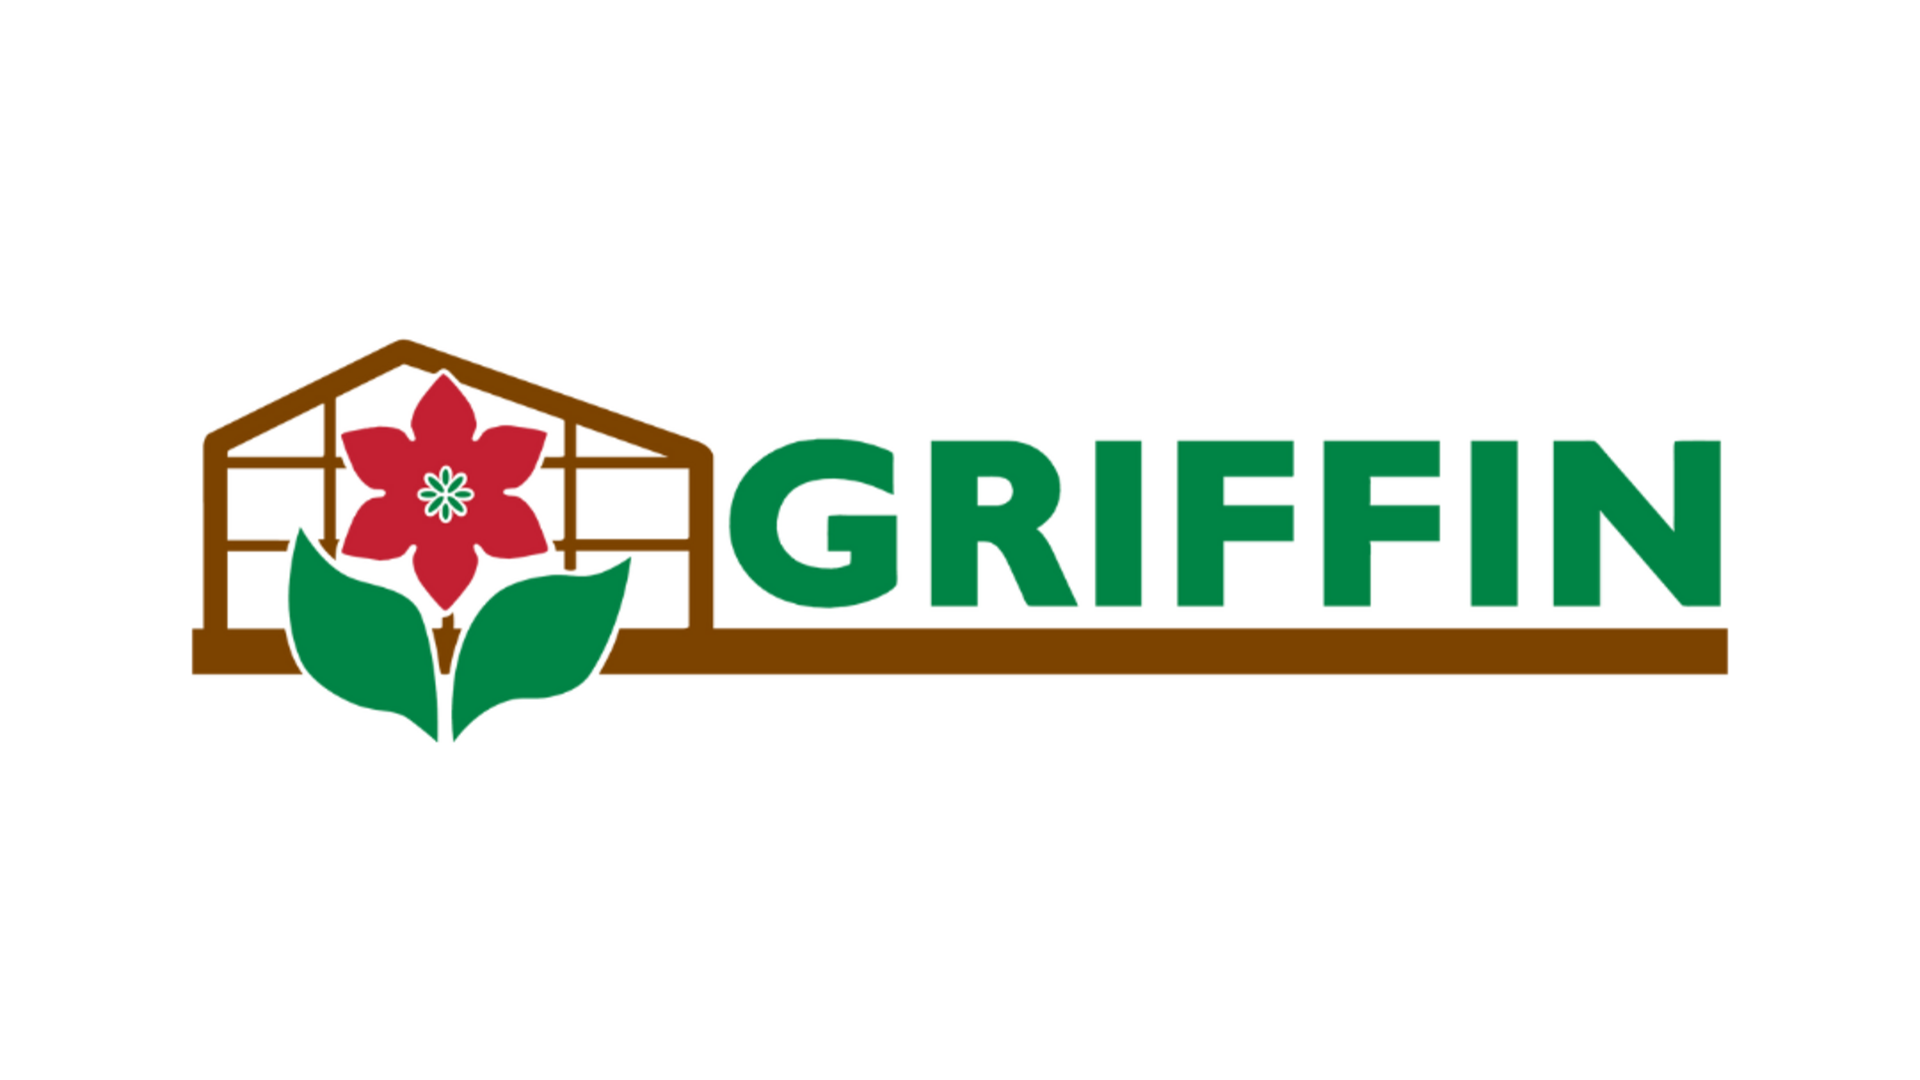 Griffin Greenhouse